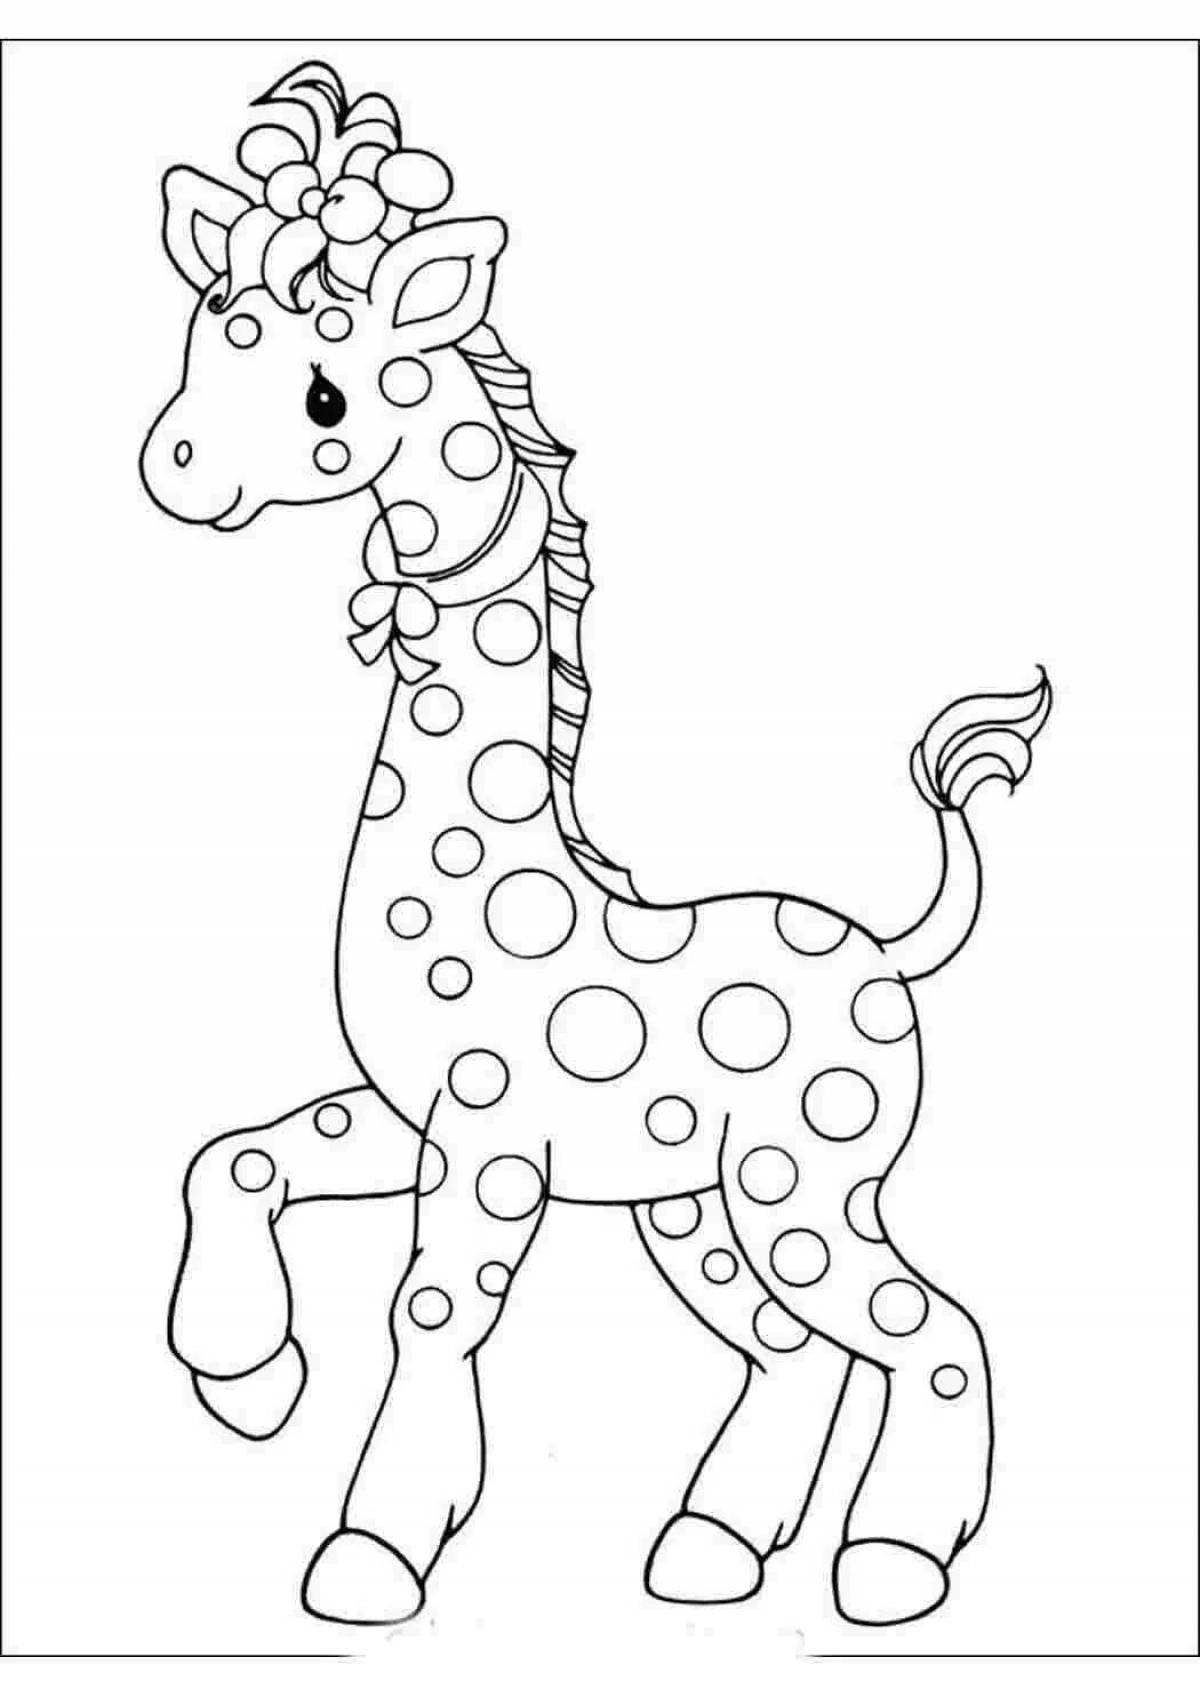 Exquisite giraffe coloring book for kids